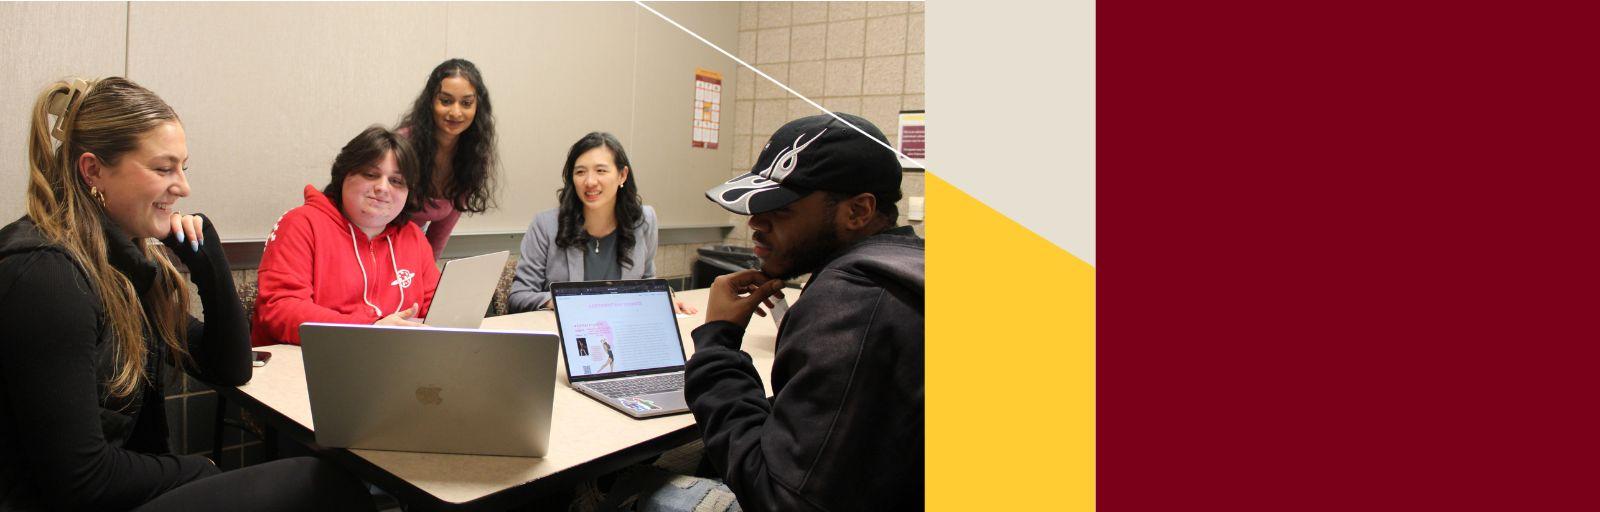 Students collaborate on a project while receiving feedback from a professor.